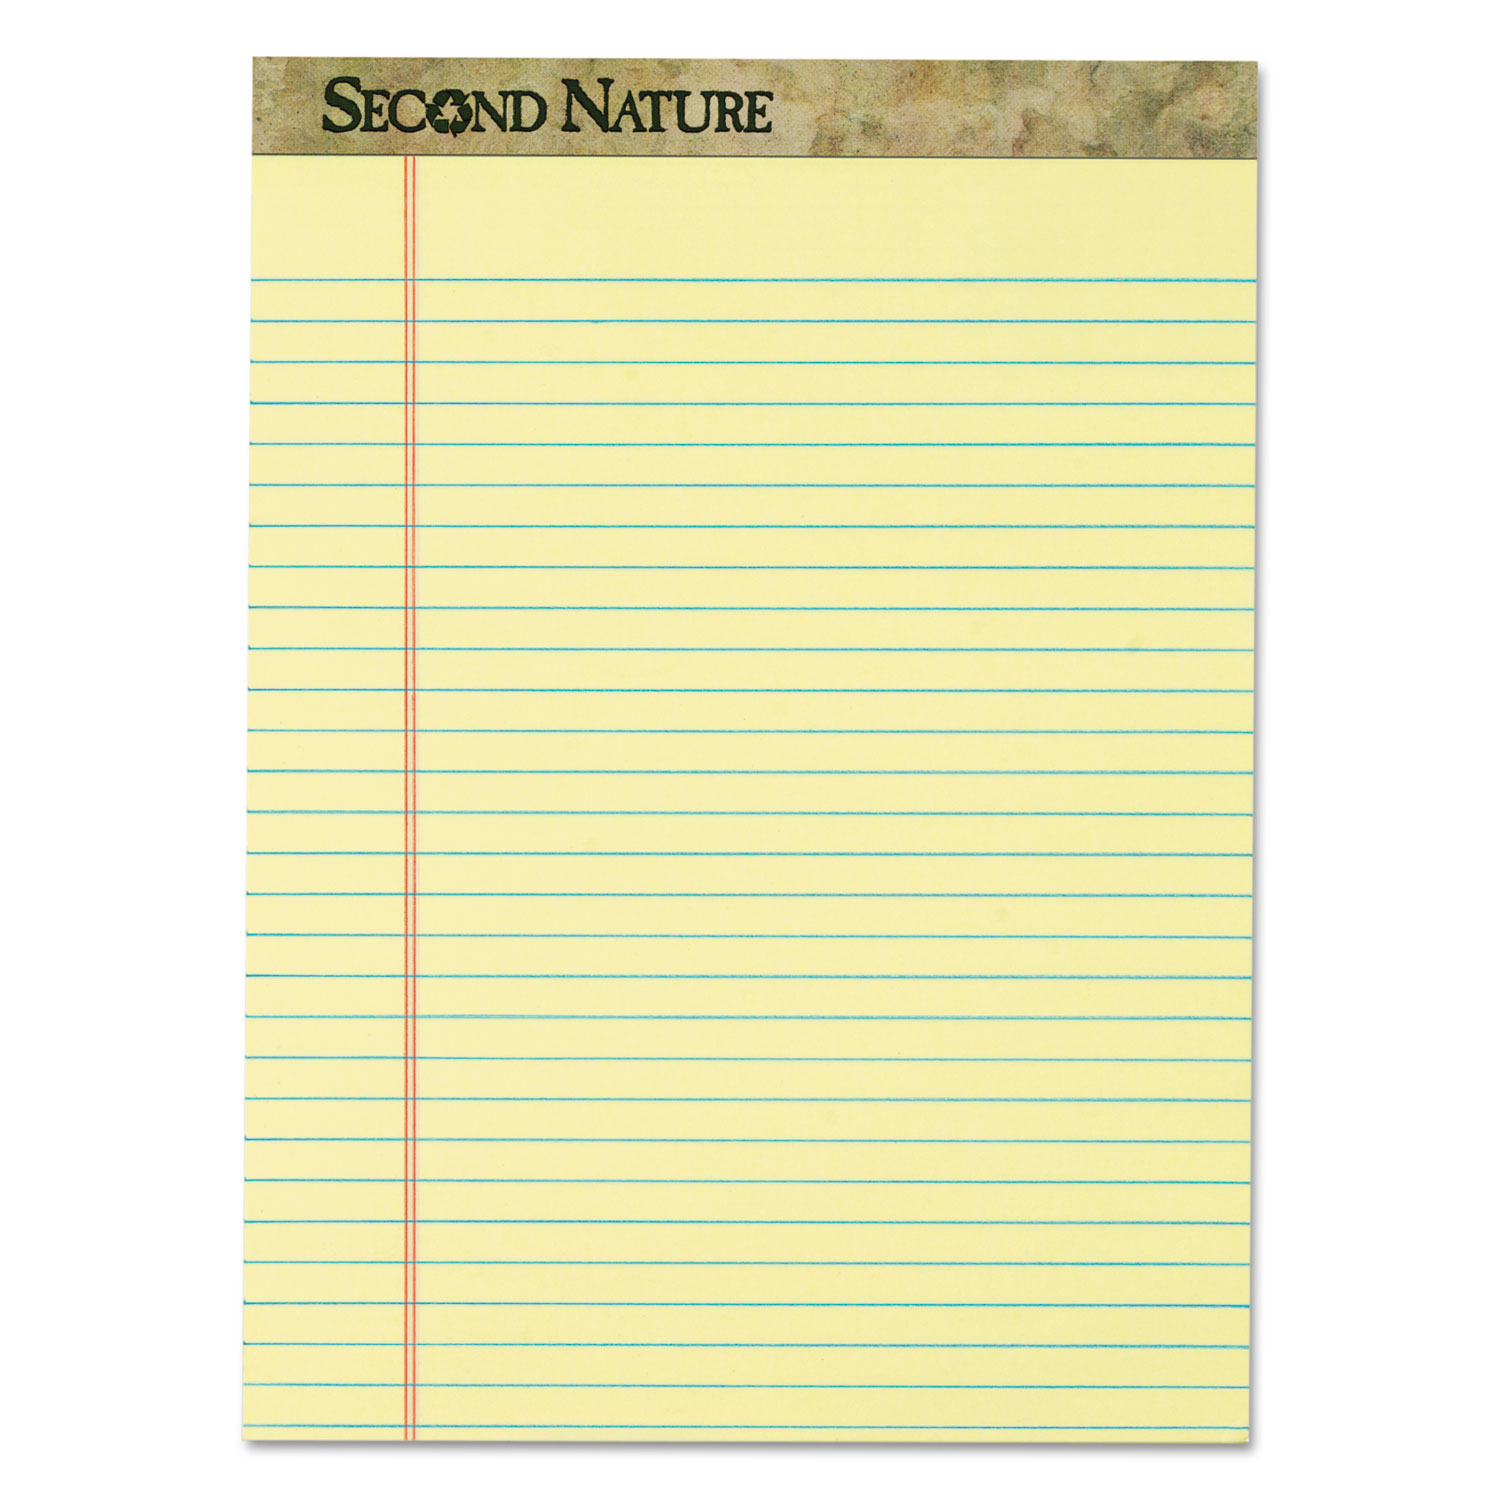  TOPS 74890 Second Nature Recycled Pads, Wide/Legal Rule, 8.5 x 11.75, Canary, 50 Sheets, Dozen (TOP74890) 